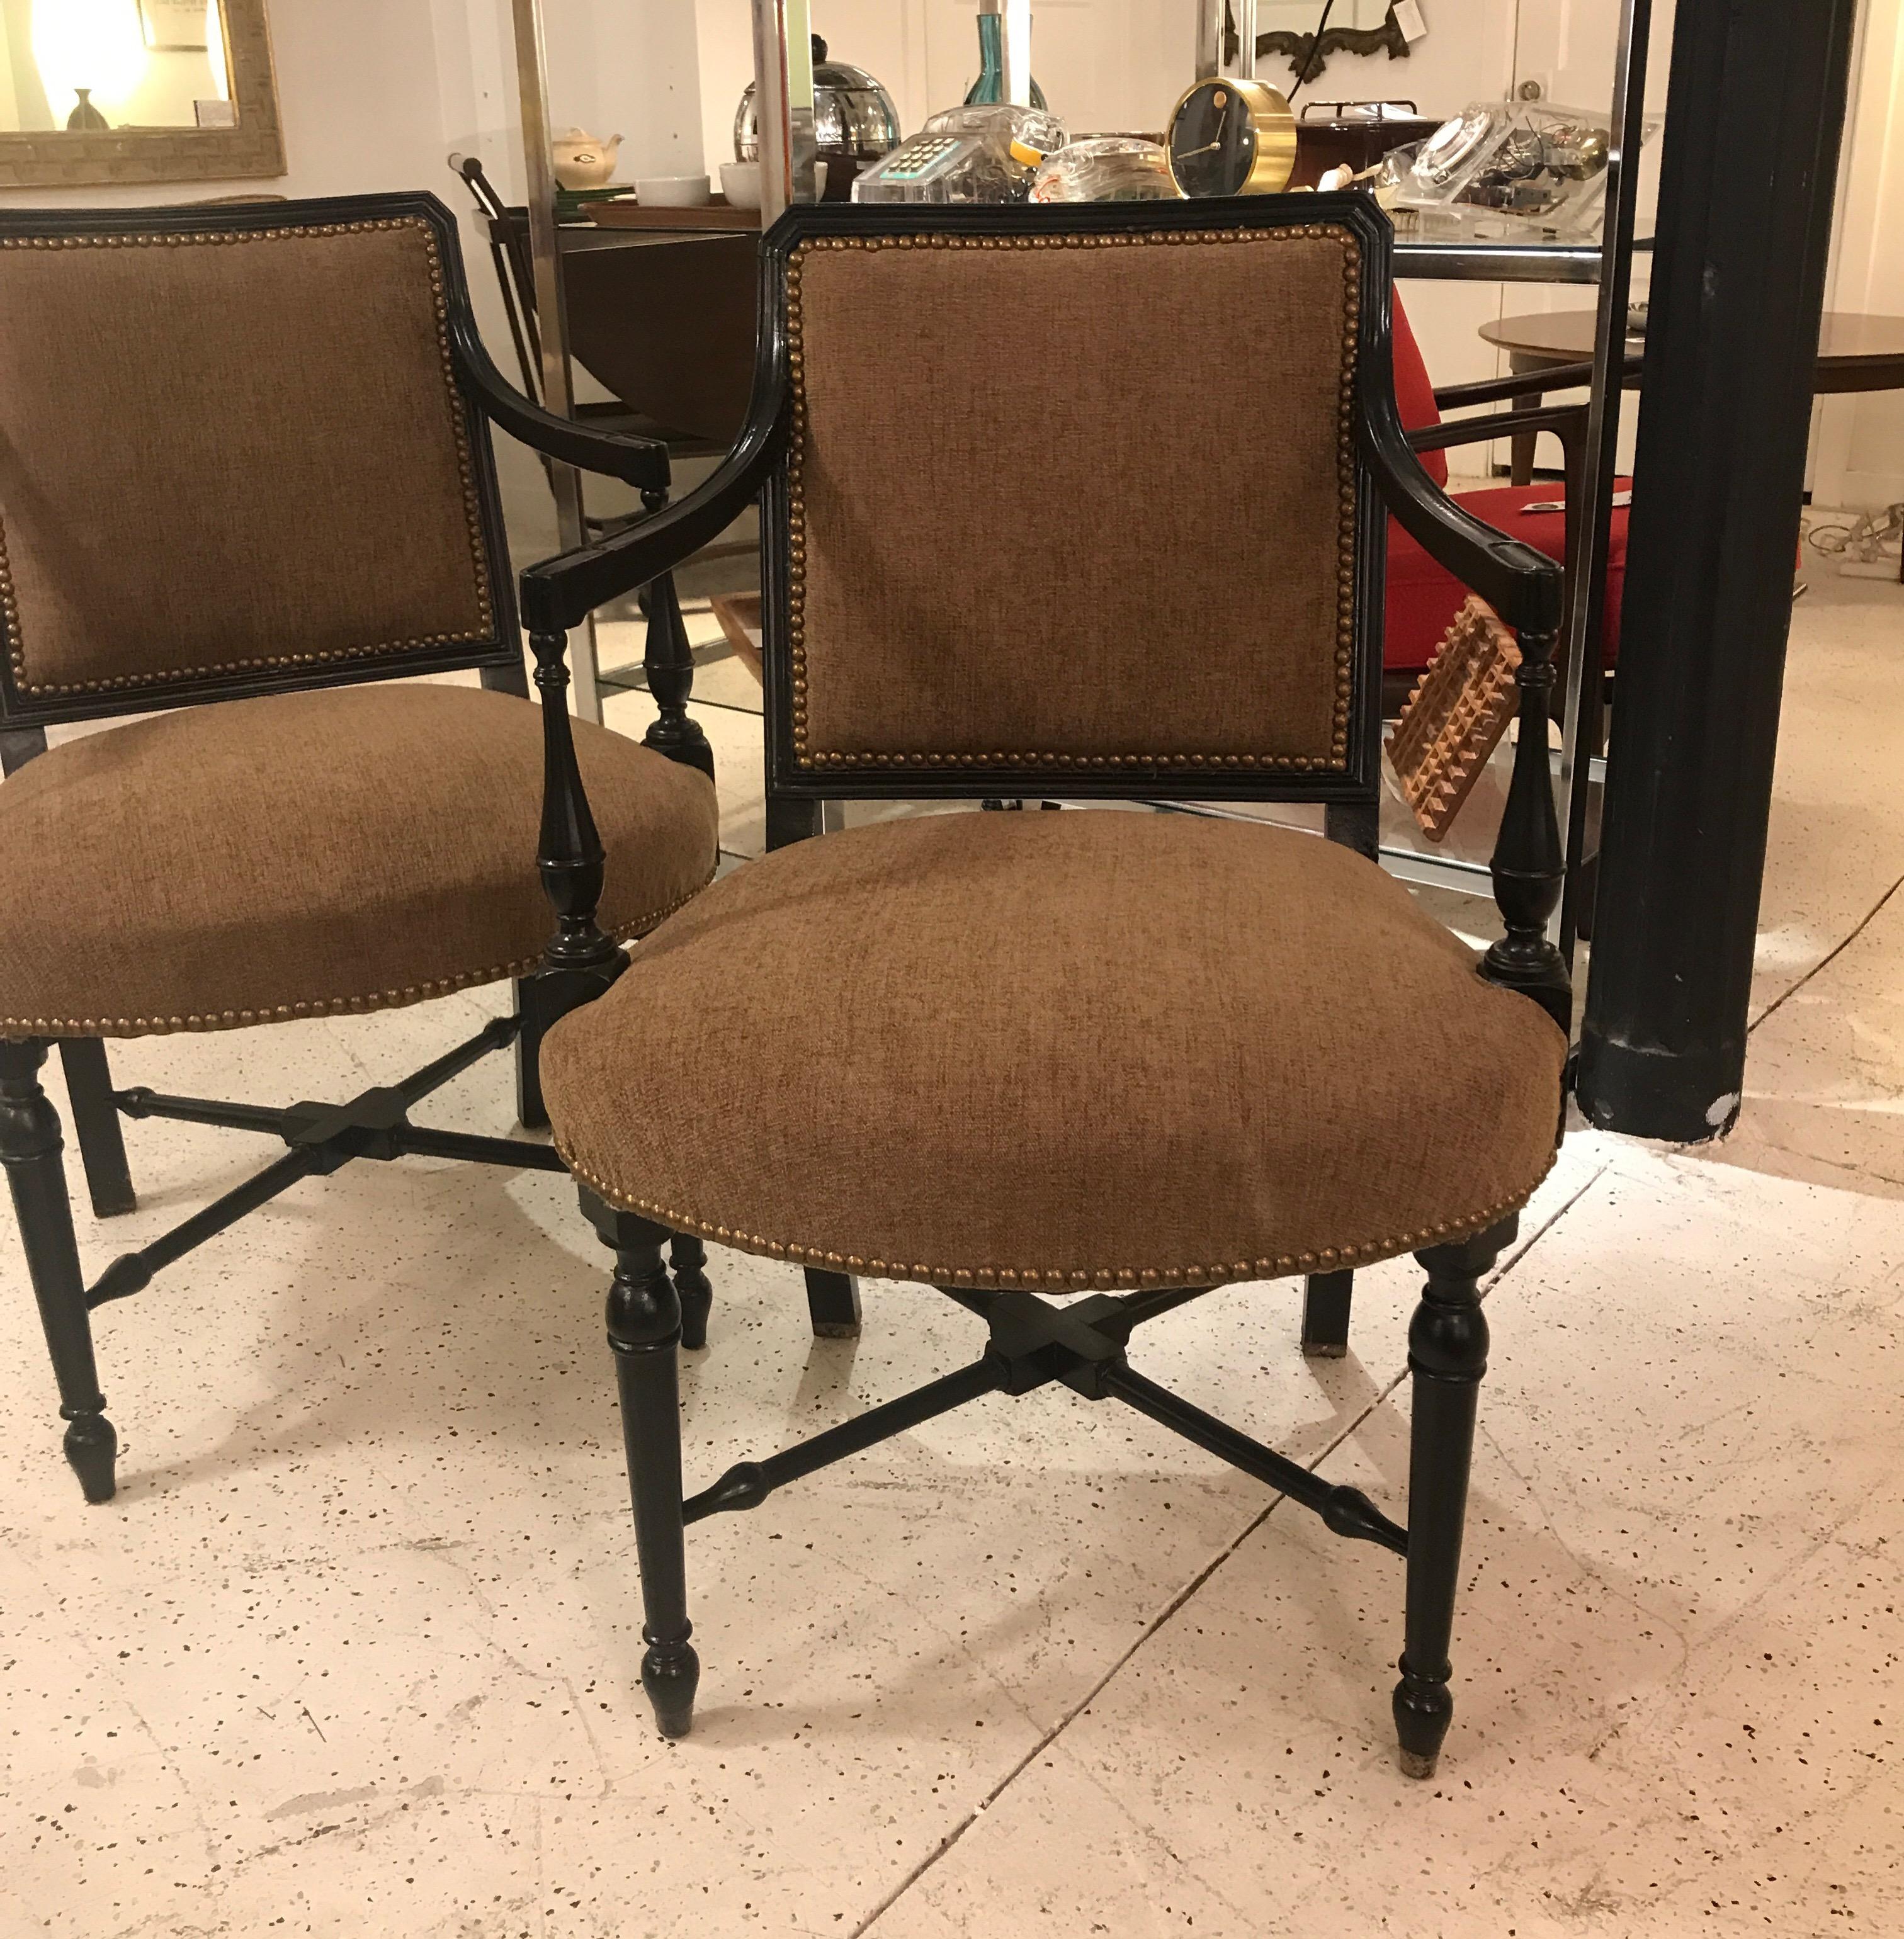 A pair of ebonized armchairs with neutral olive-tan chenille upholstery. The sturdy wood frame with ebony finish is trimmed with antiqued brass nail head trim. Handsome shape with nicely turned legs and X-stretcher base and slightly sloping arms.